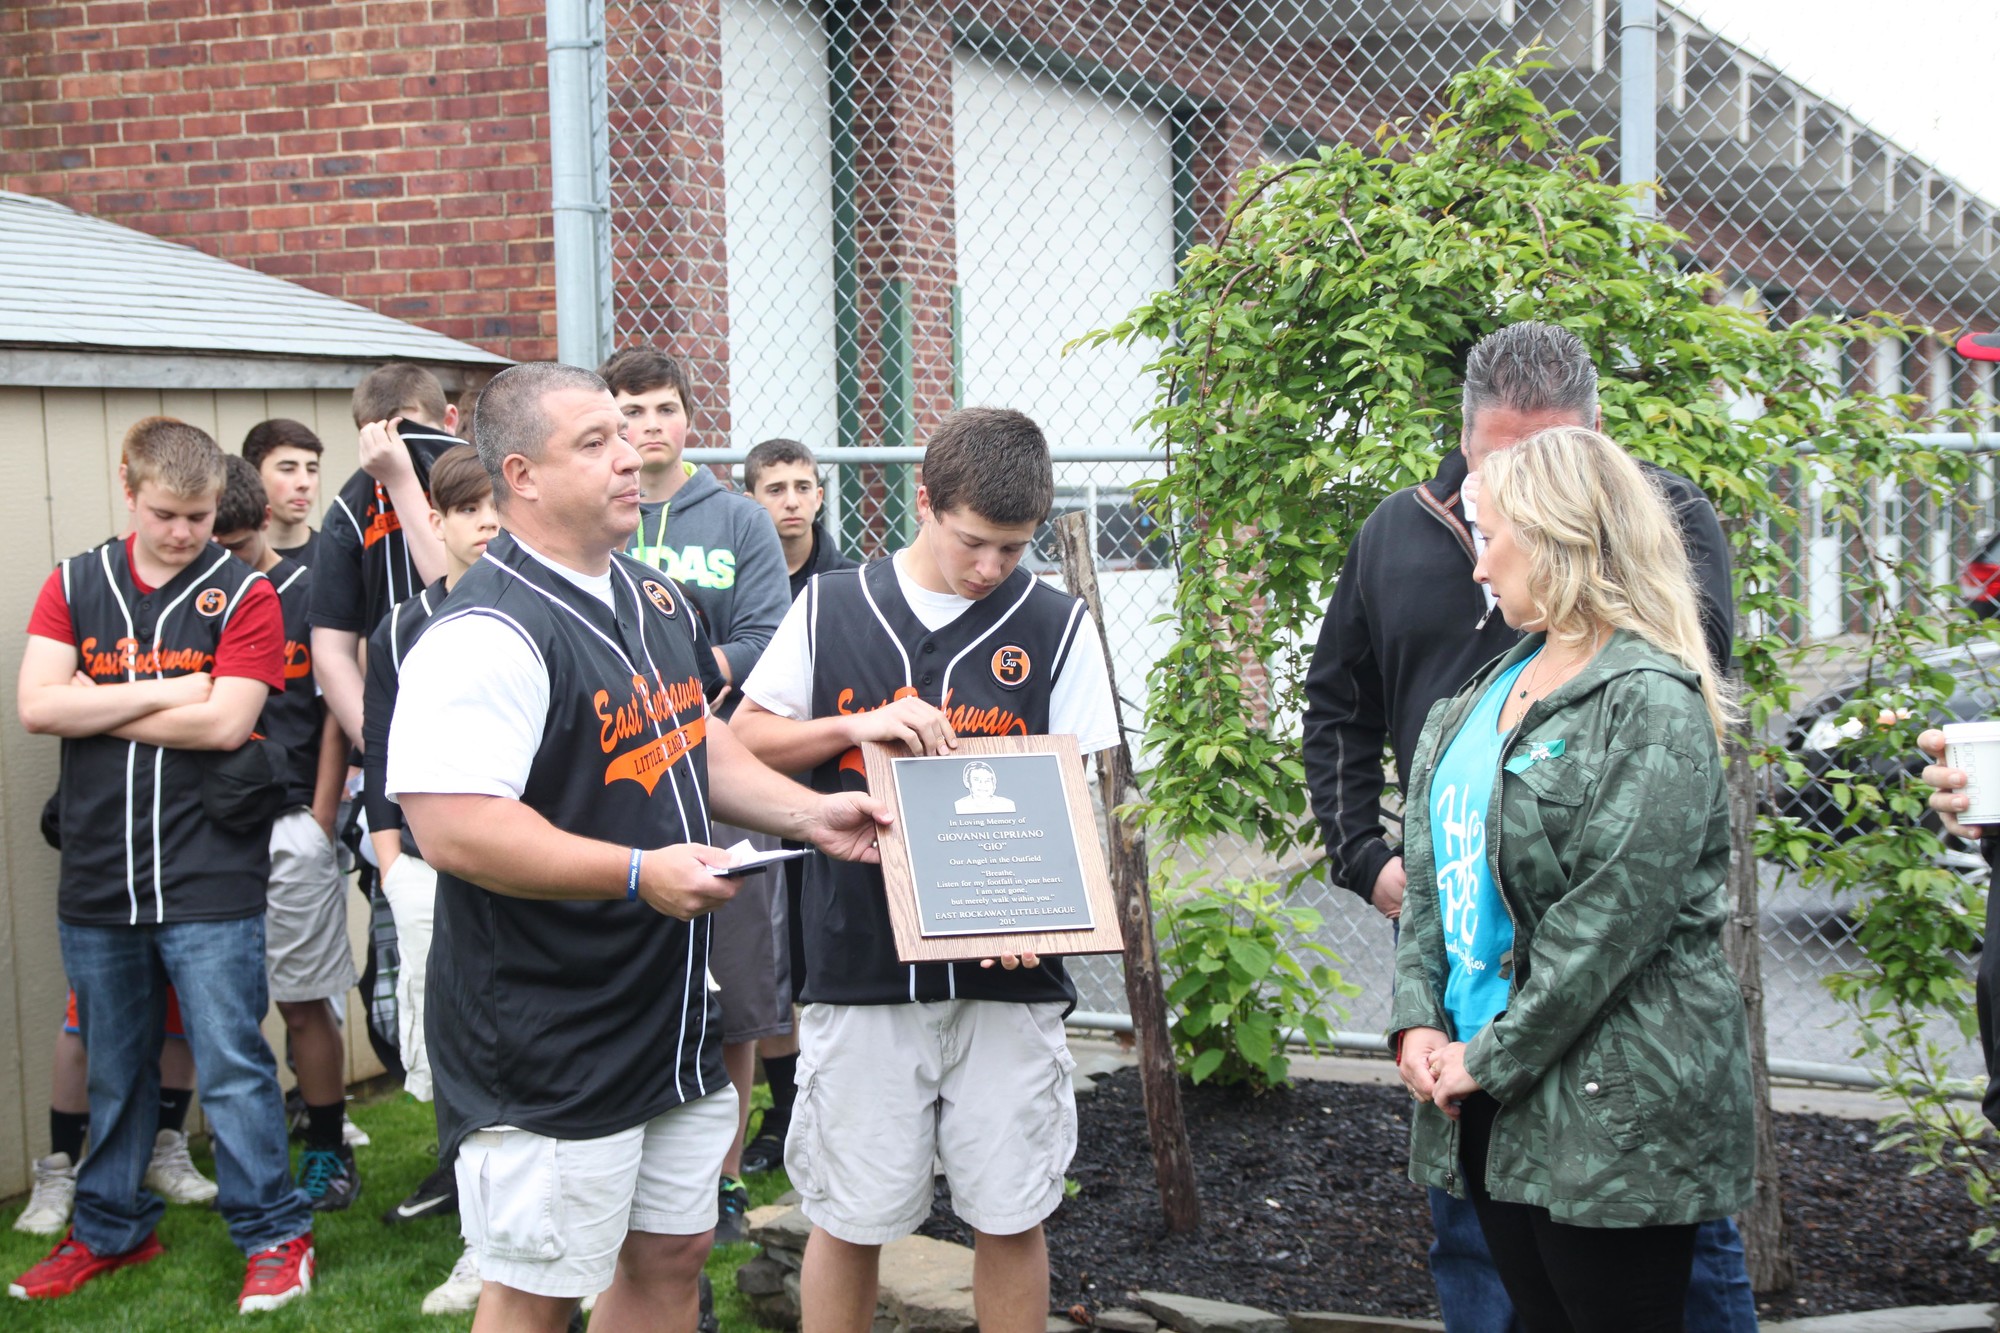 Coach Tom LaBarbera and his son Matthew, one of Gio's teammates, present a plaque in Gio's honor to John and Georgina Cipriano.